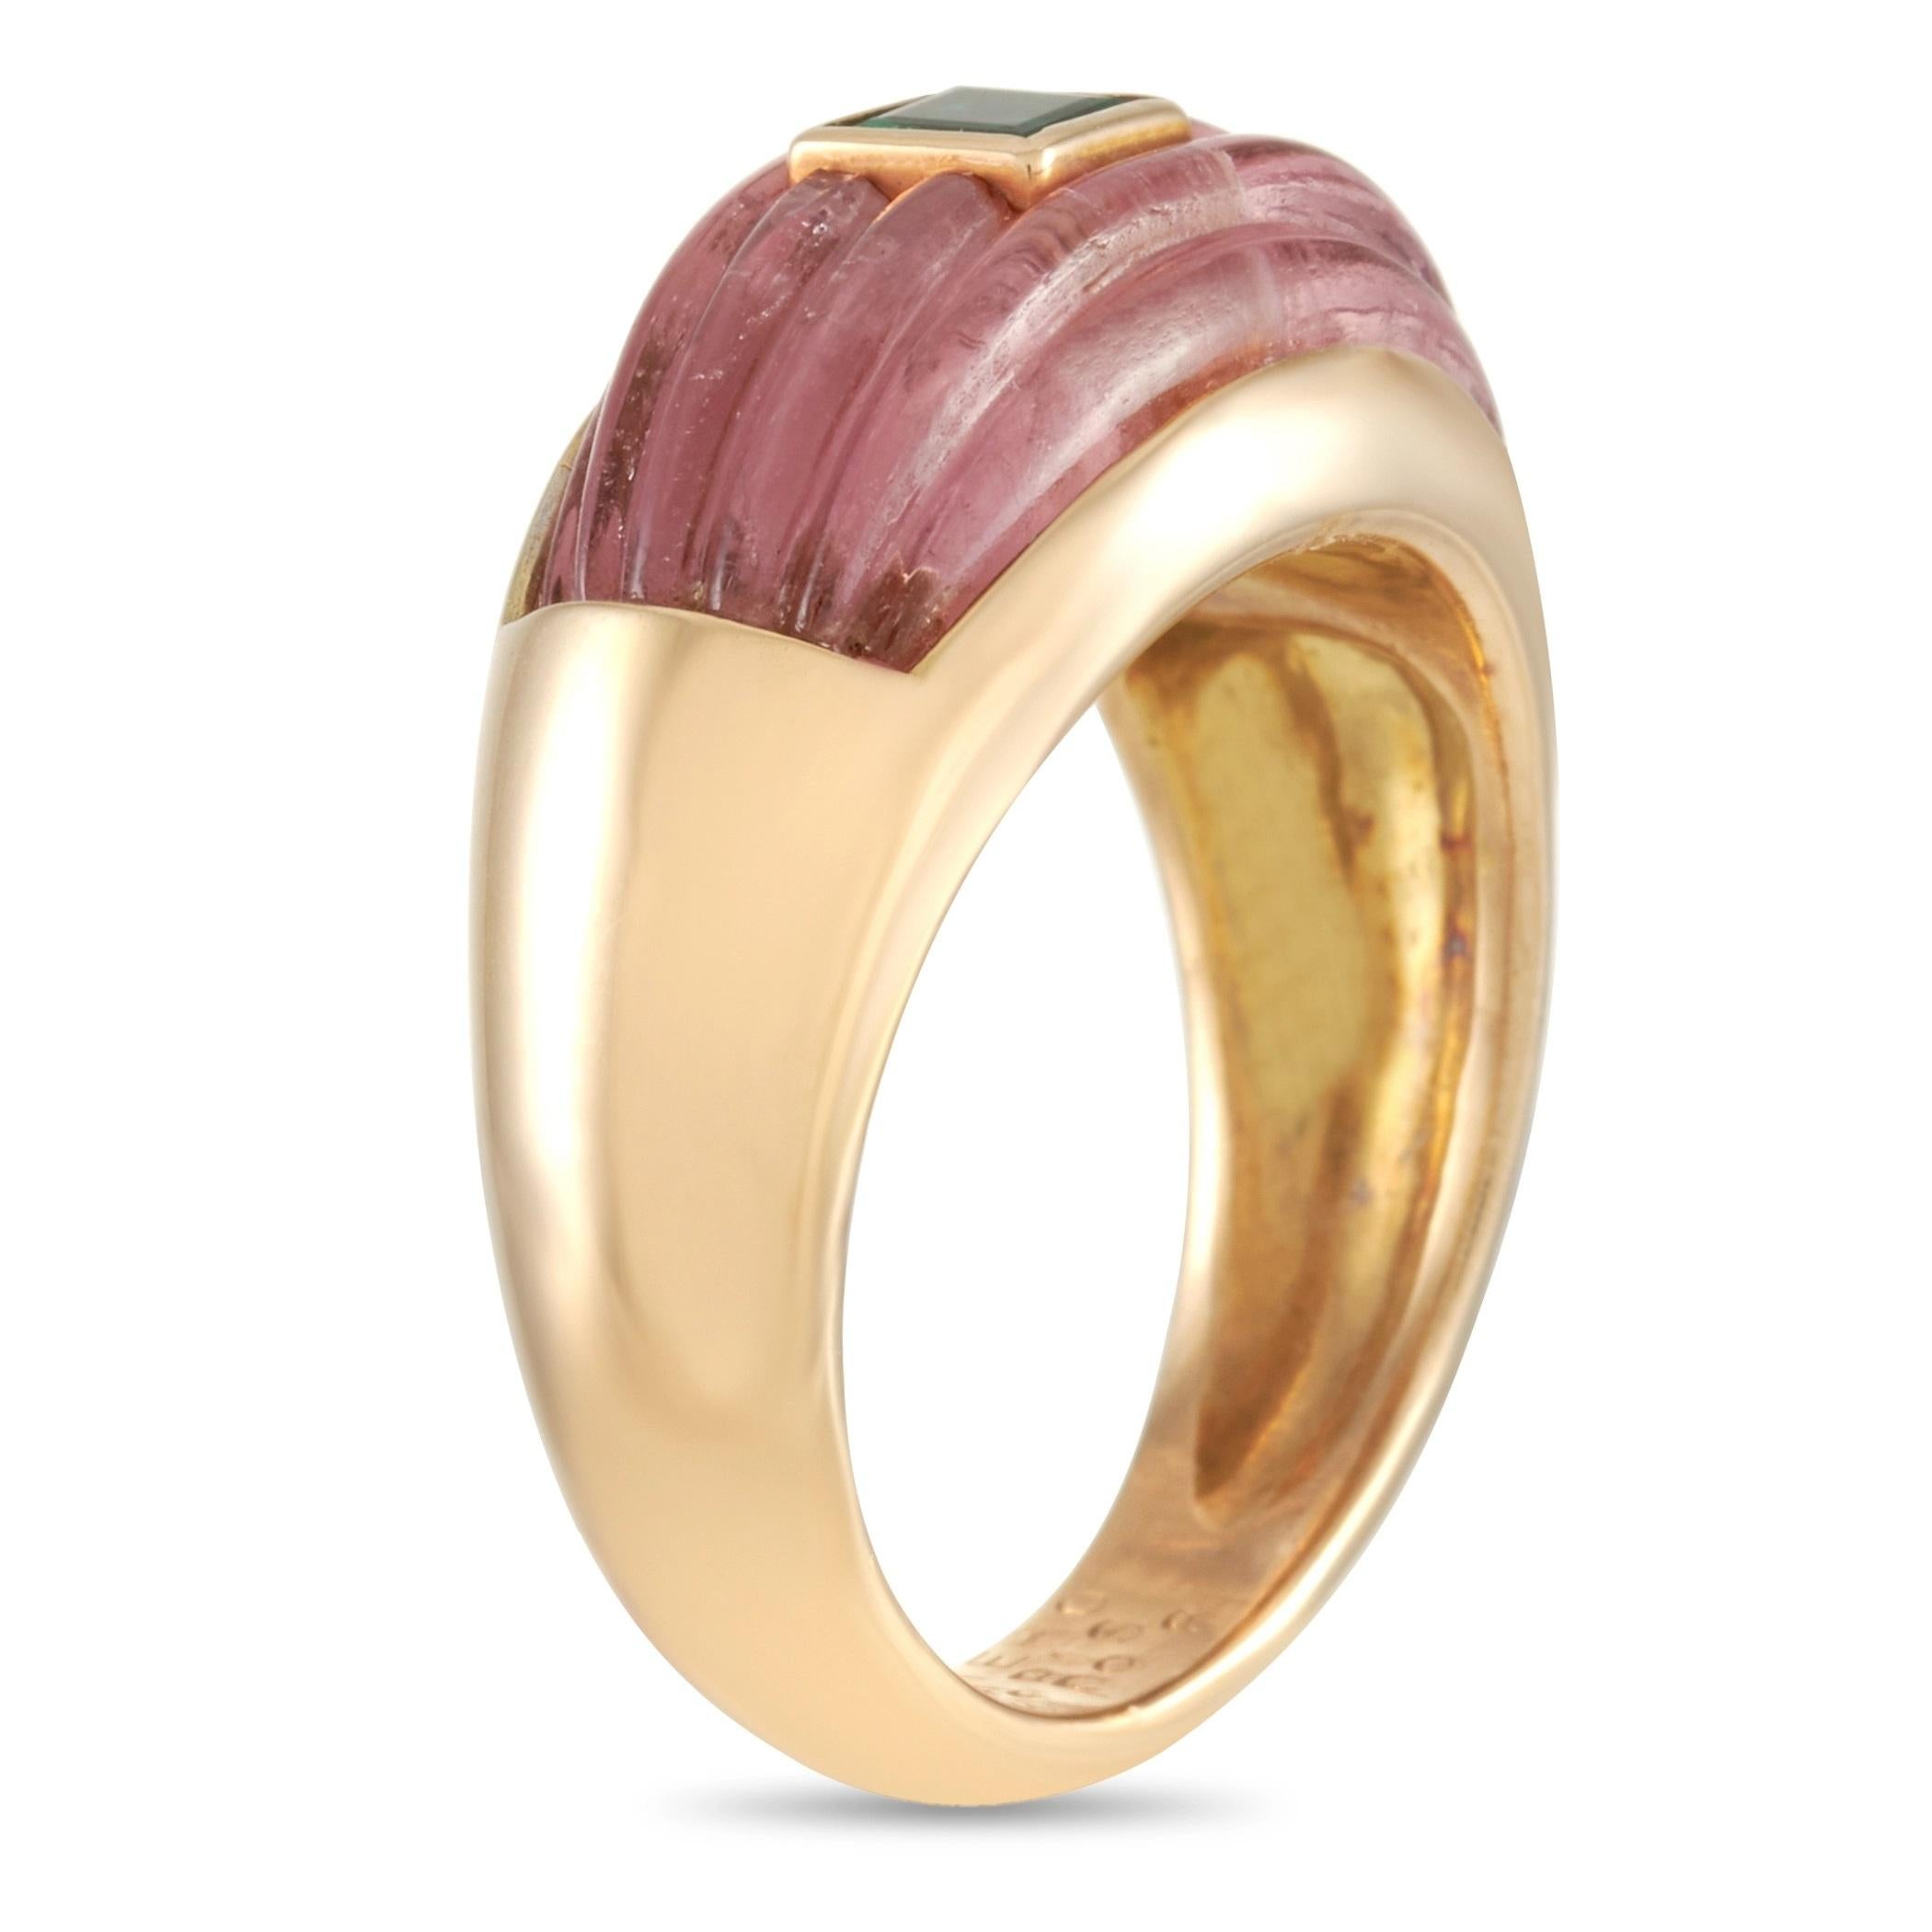 This Mellero ring is made of 18K yellow gold and set with a tourmaline and an emerald. The ring weighs 12.7 grams and boasts band thickness of 5 mm and top height of 6 mm, while top dimensions measure 10 by 19 mm.
 
 Offered in estate condition,